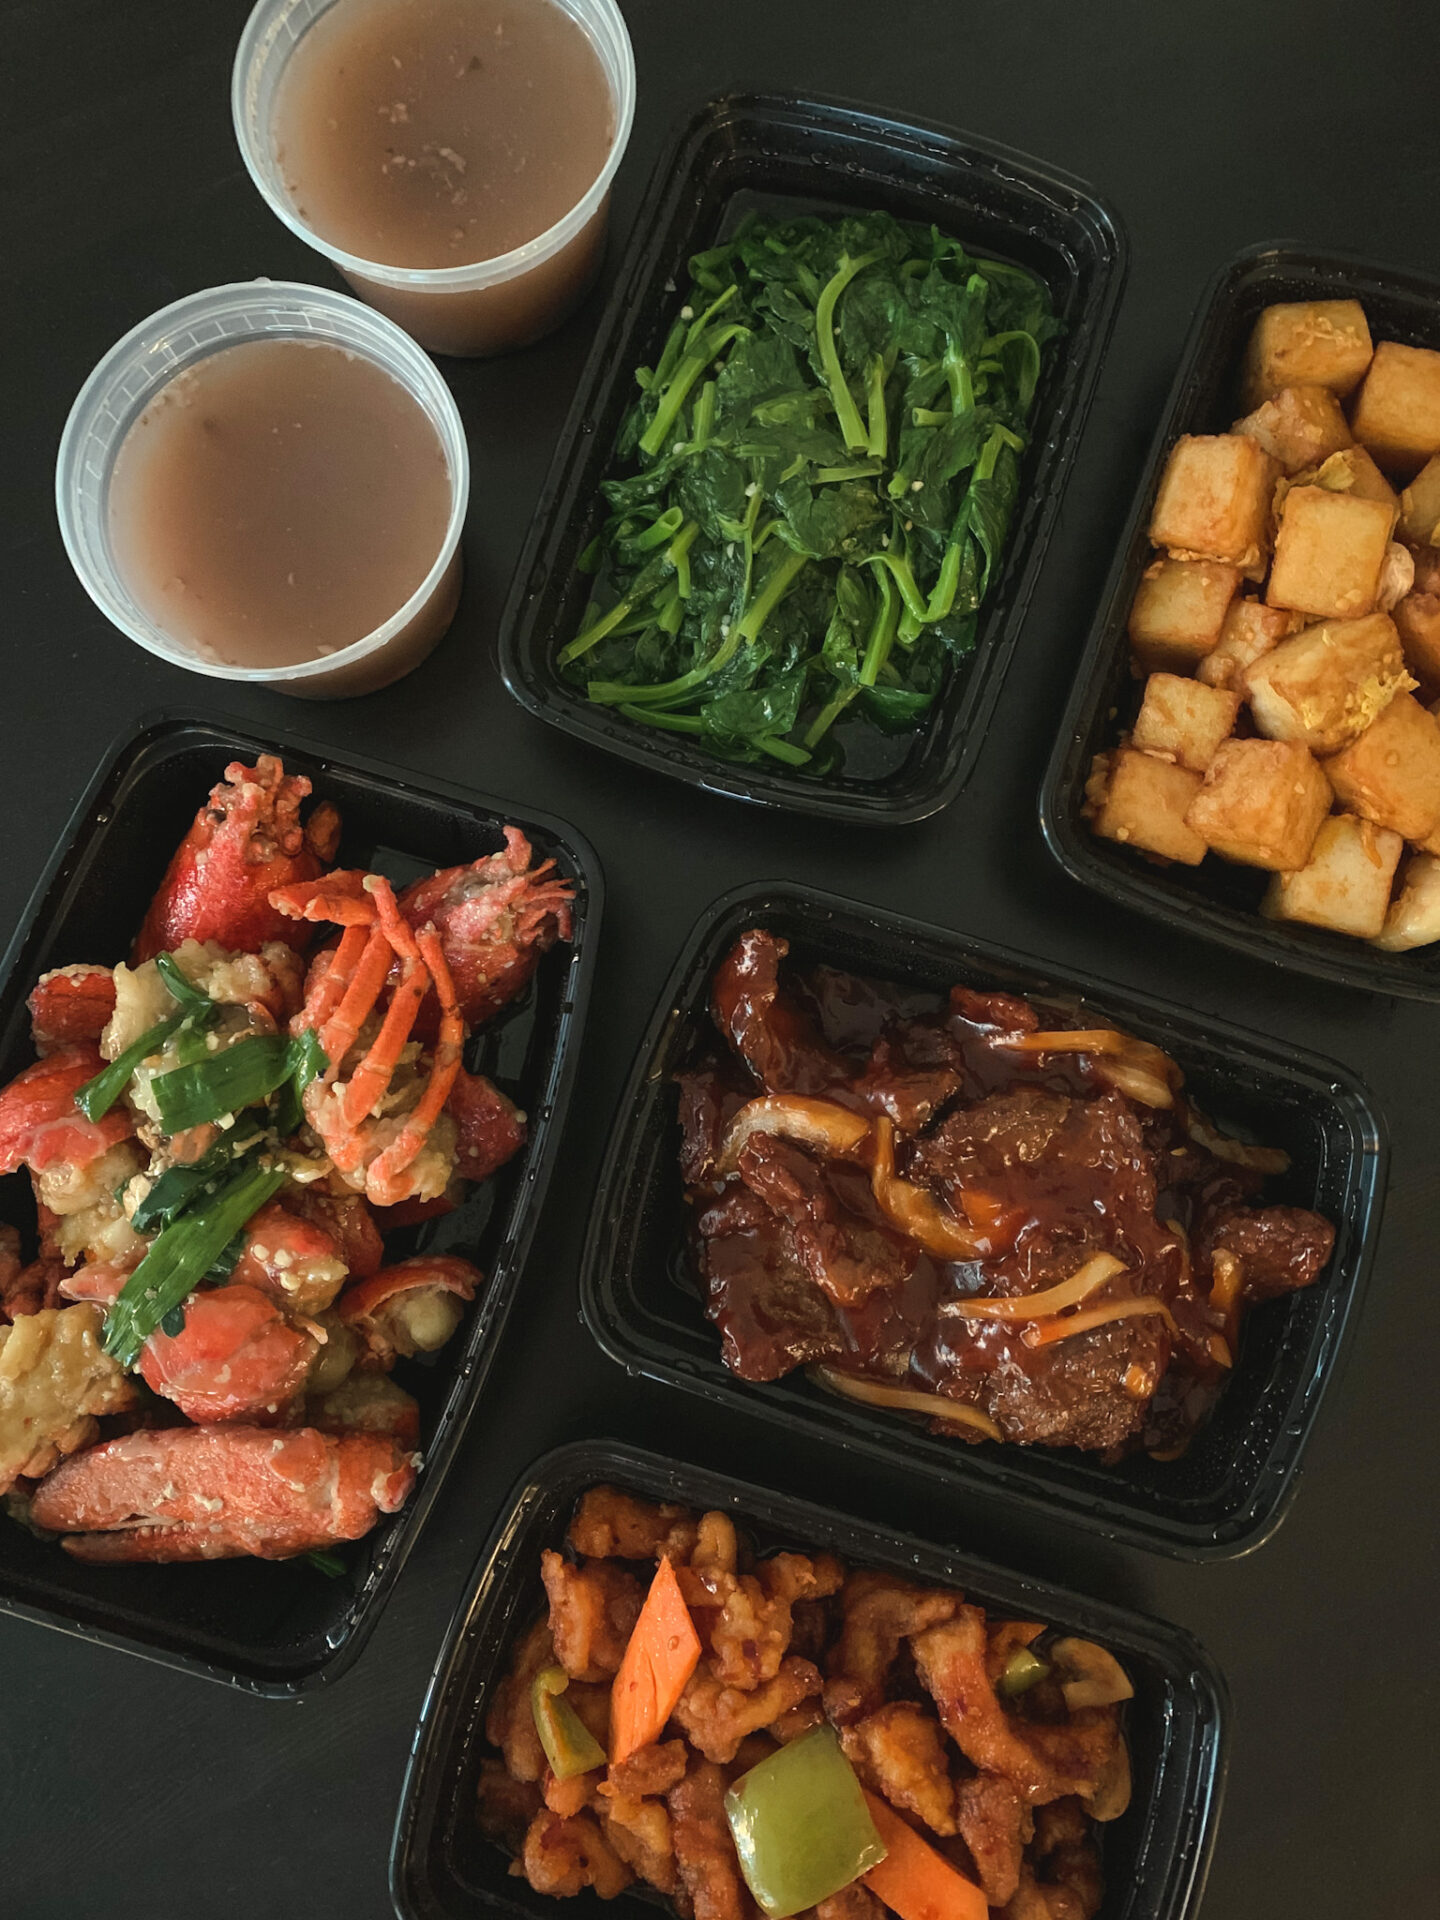 Lunar New Year takeout from House of Gourmet Chinese restaurant in Toronto